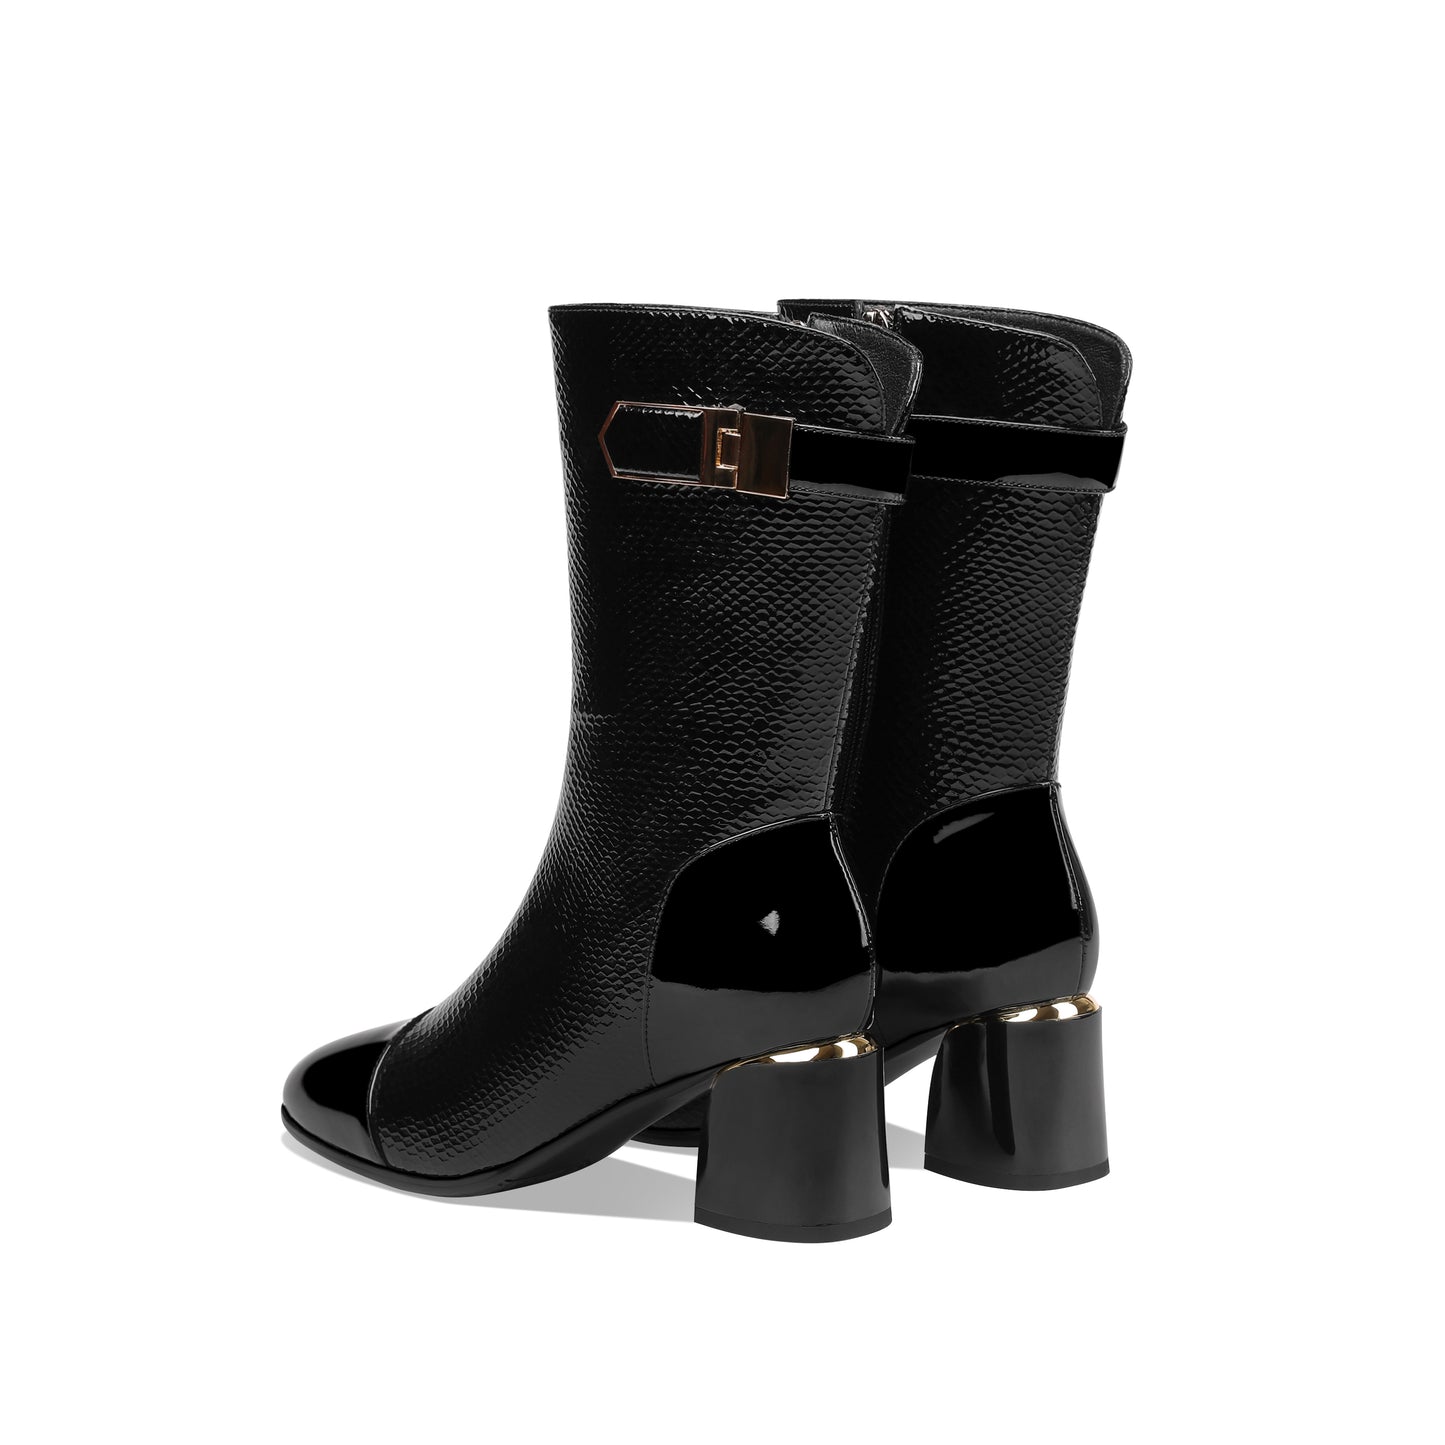 TinaCus Handmade Women's Patent Leather Side Zip Up Block Heel Cap-Toe Black Mid-Calf Boots with Chic Metal Pattern